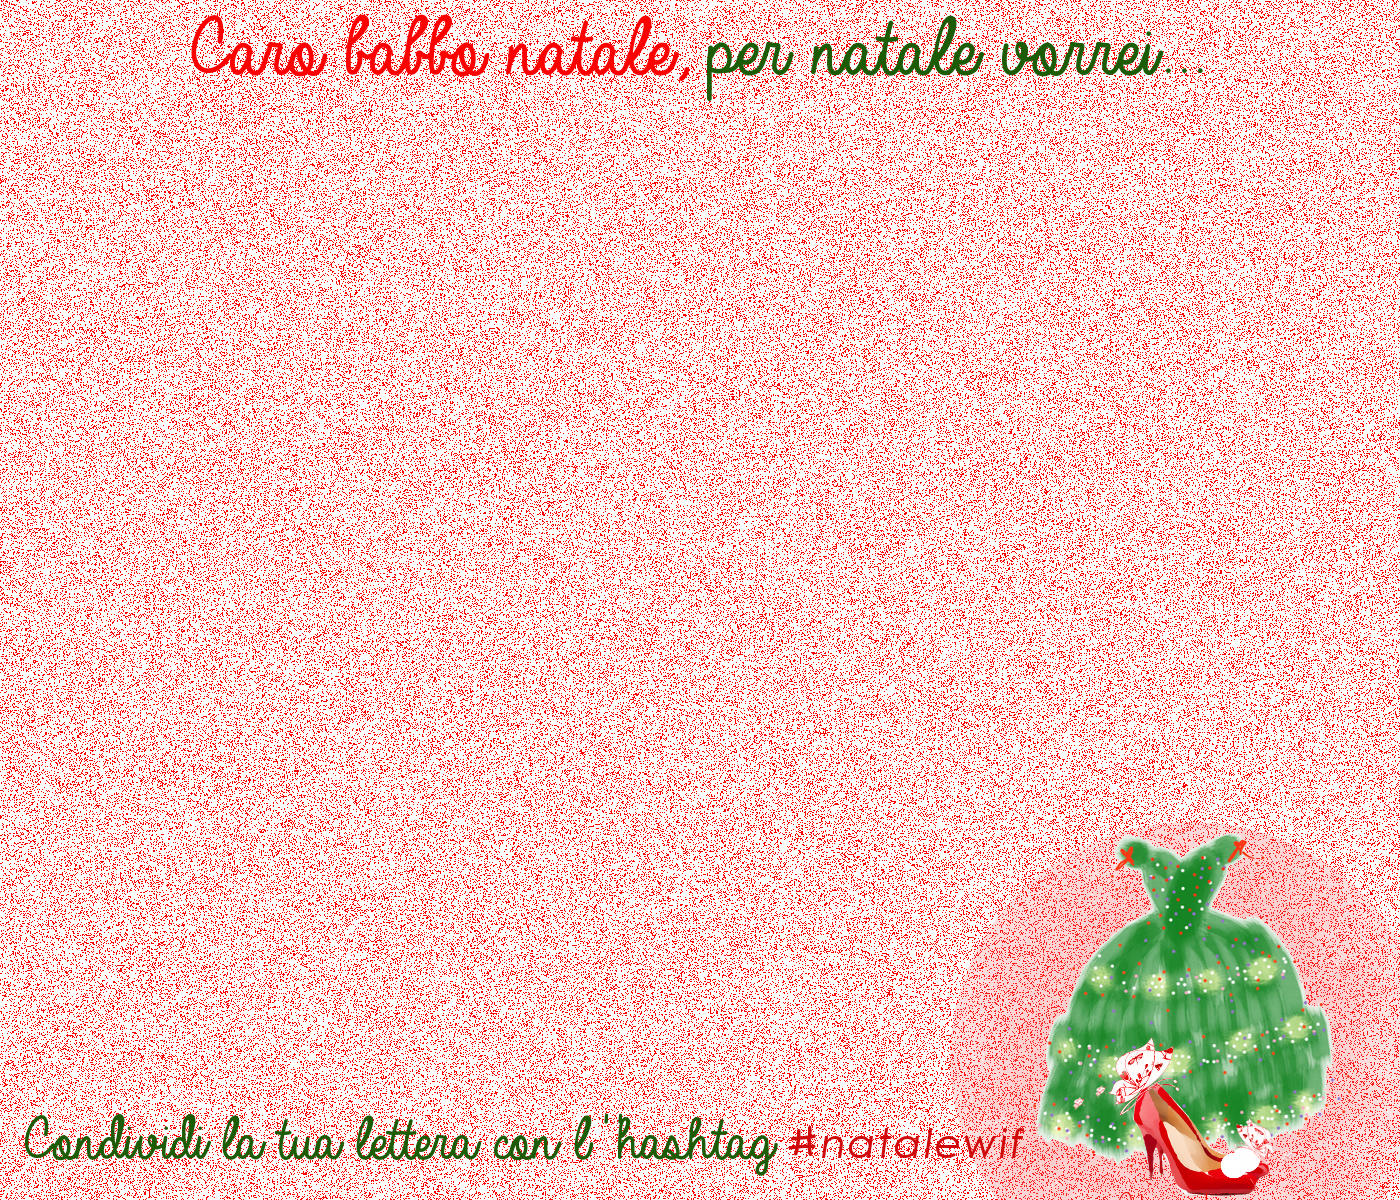 Hashtag Natale.The Editor Wrapped In Fashion By Vicky Pelo Novembre 2015